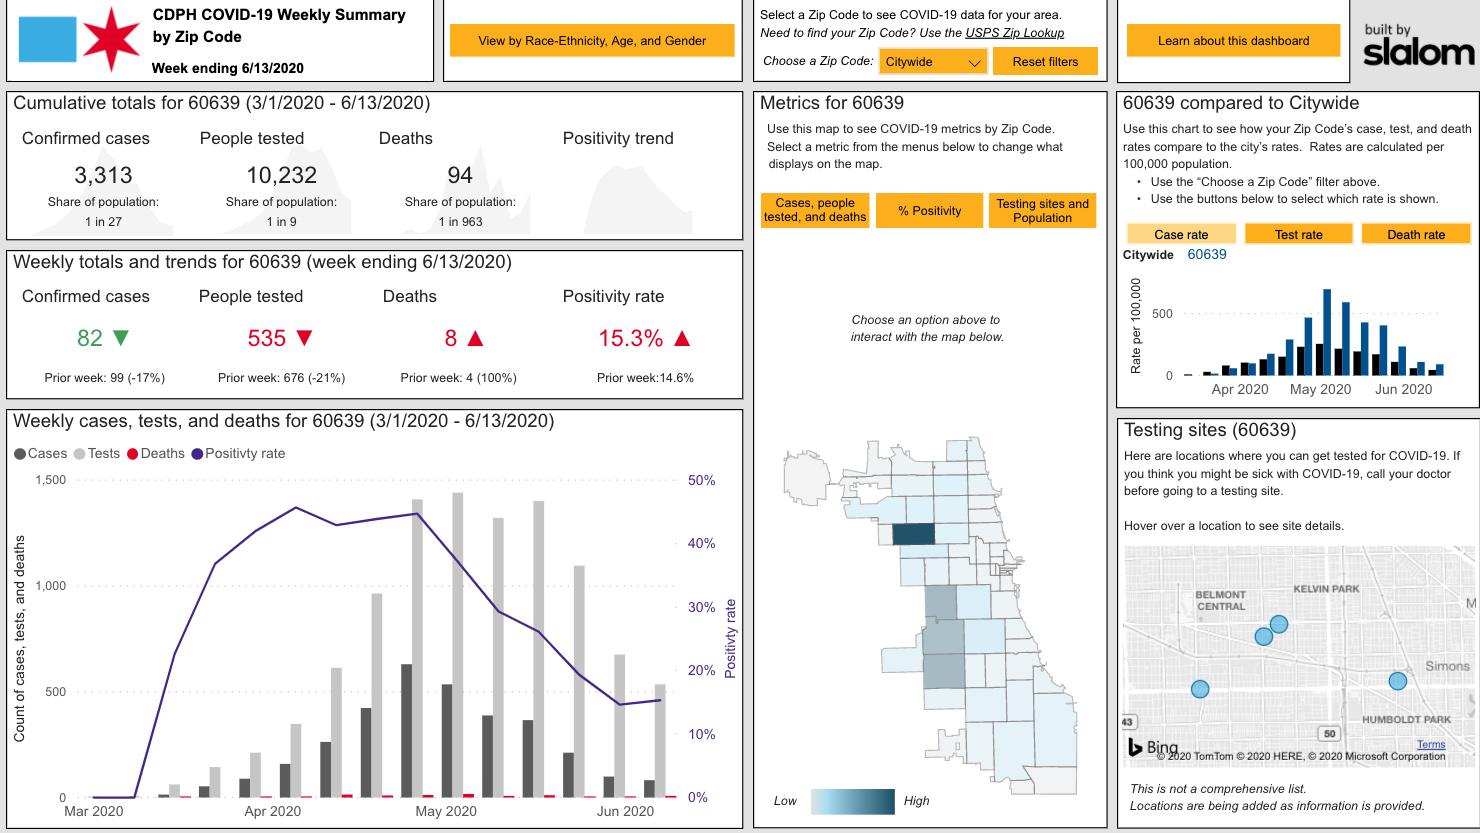 Screenshot from city of Chicago COVID Daily Dashboard. (City of Chicago)